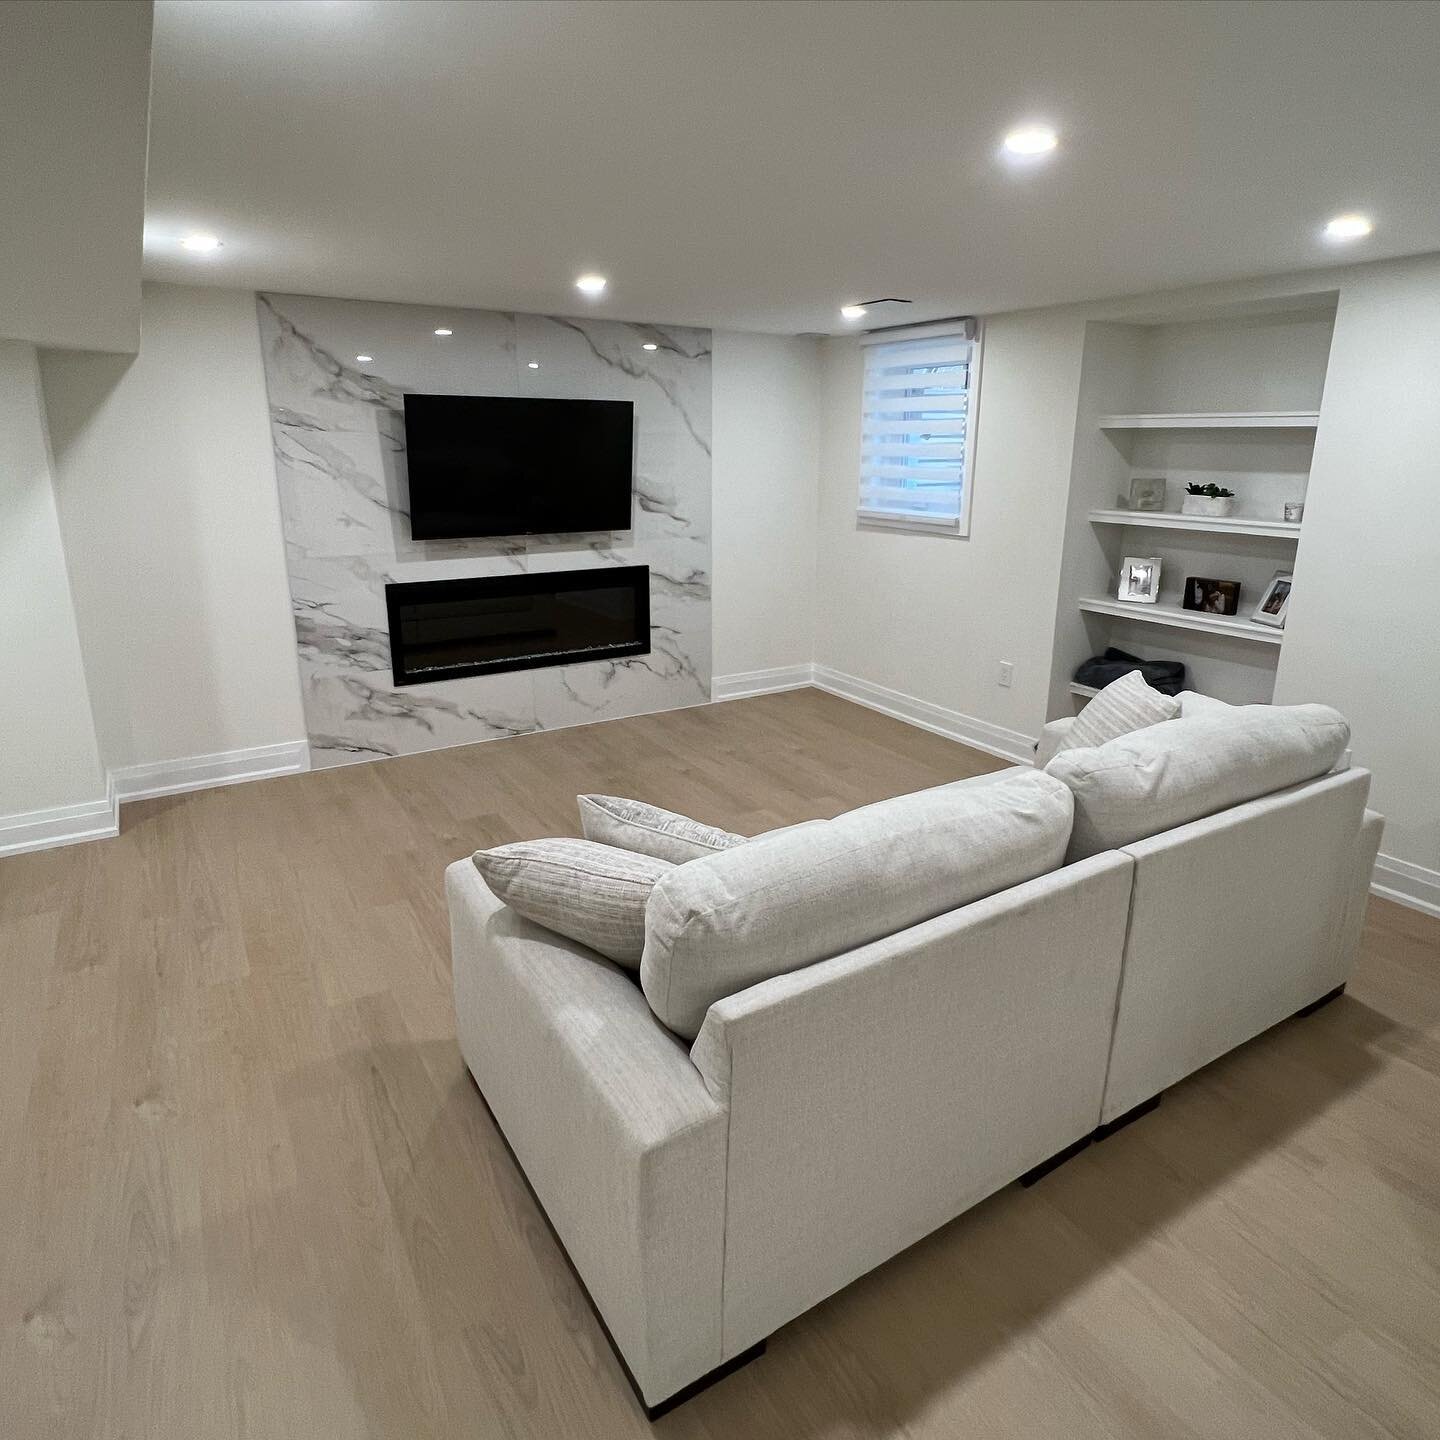 Who said a basement couldn&rsquo;t be cozy? 🔥

Swipe for before 👉

#fireplace #fireplacerenovation #basementremodel #basementrenovation #torontorenovation #torontorealestate #torontocontractor #basementdesign